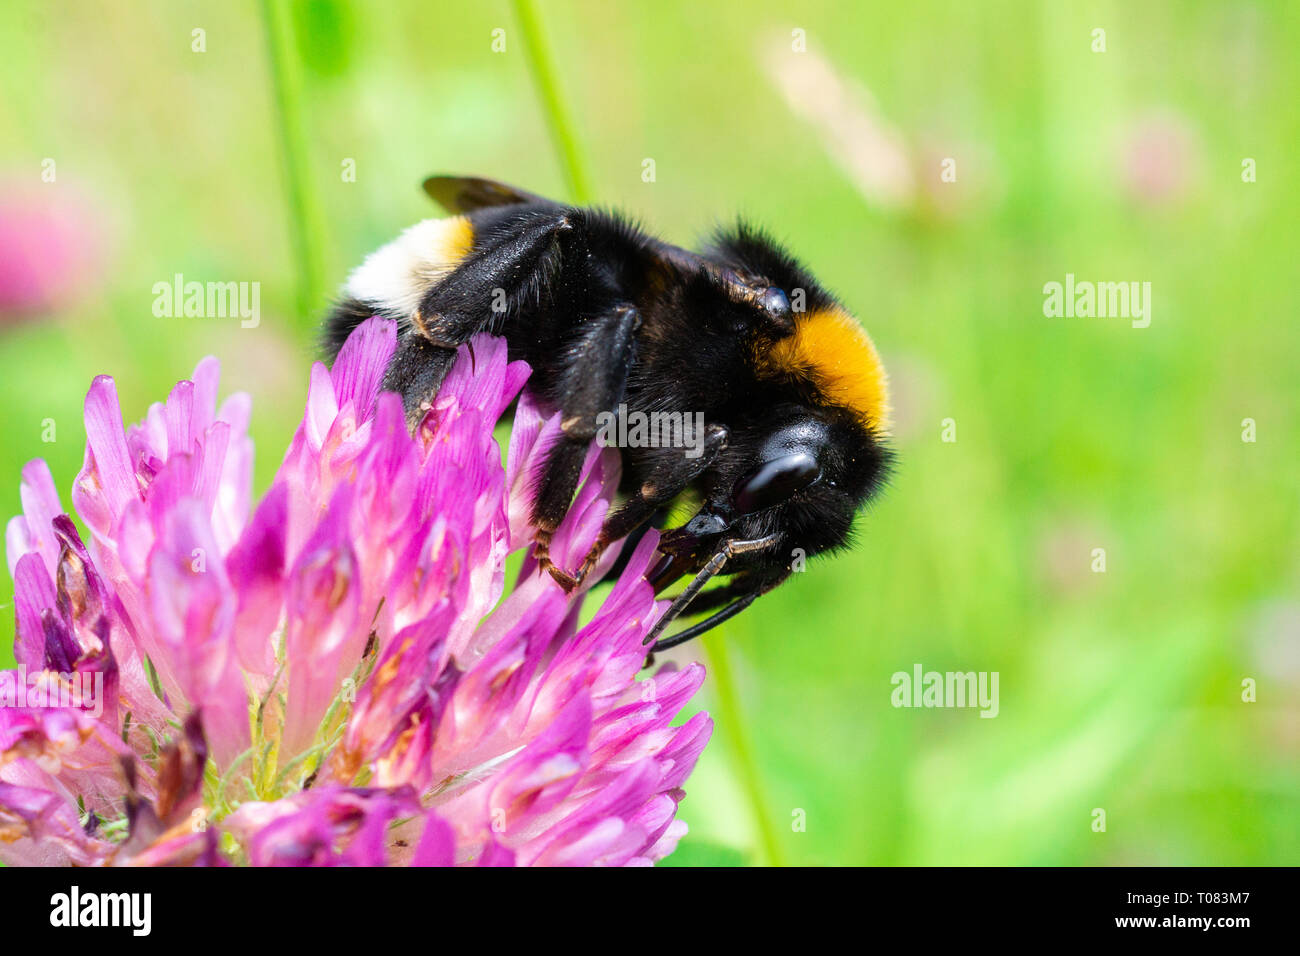 A bumblebee gathers pollen on a red flower, a bumblebee on a clover Stock Photo